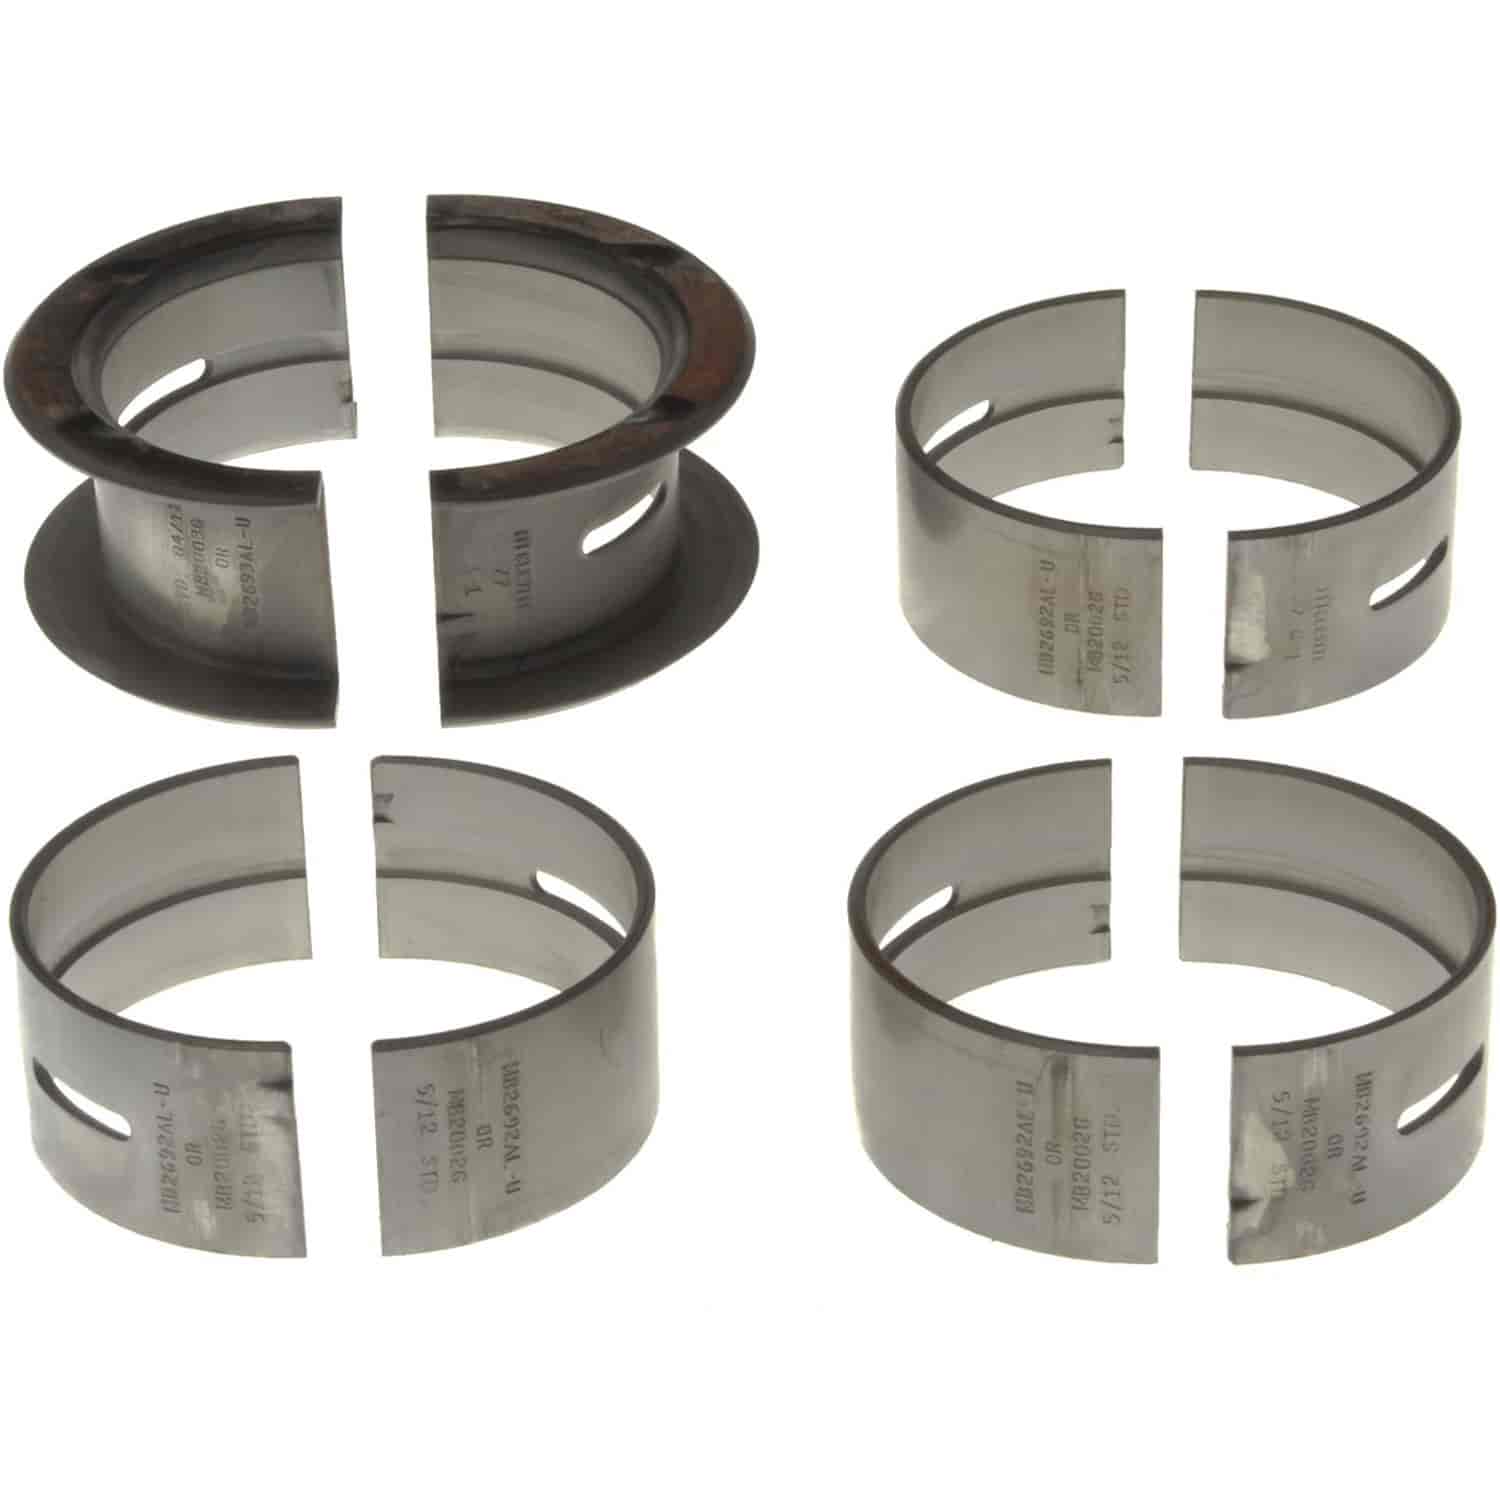 Main Bearing Set Ford 1961-1973 L6 144, 170, 187 ci  with Standard Size